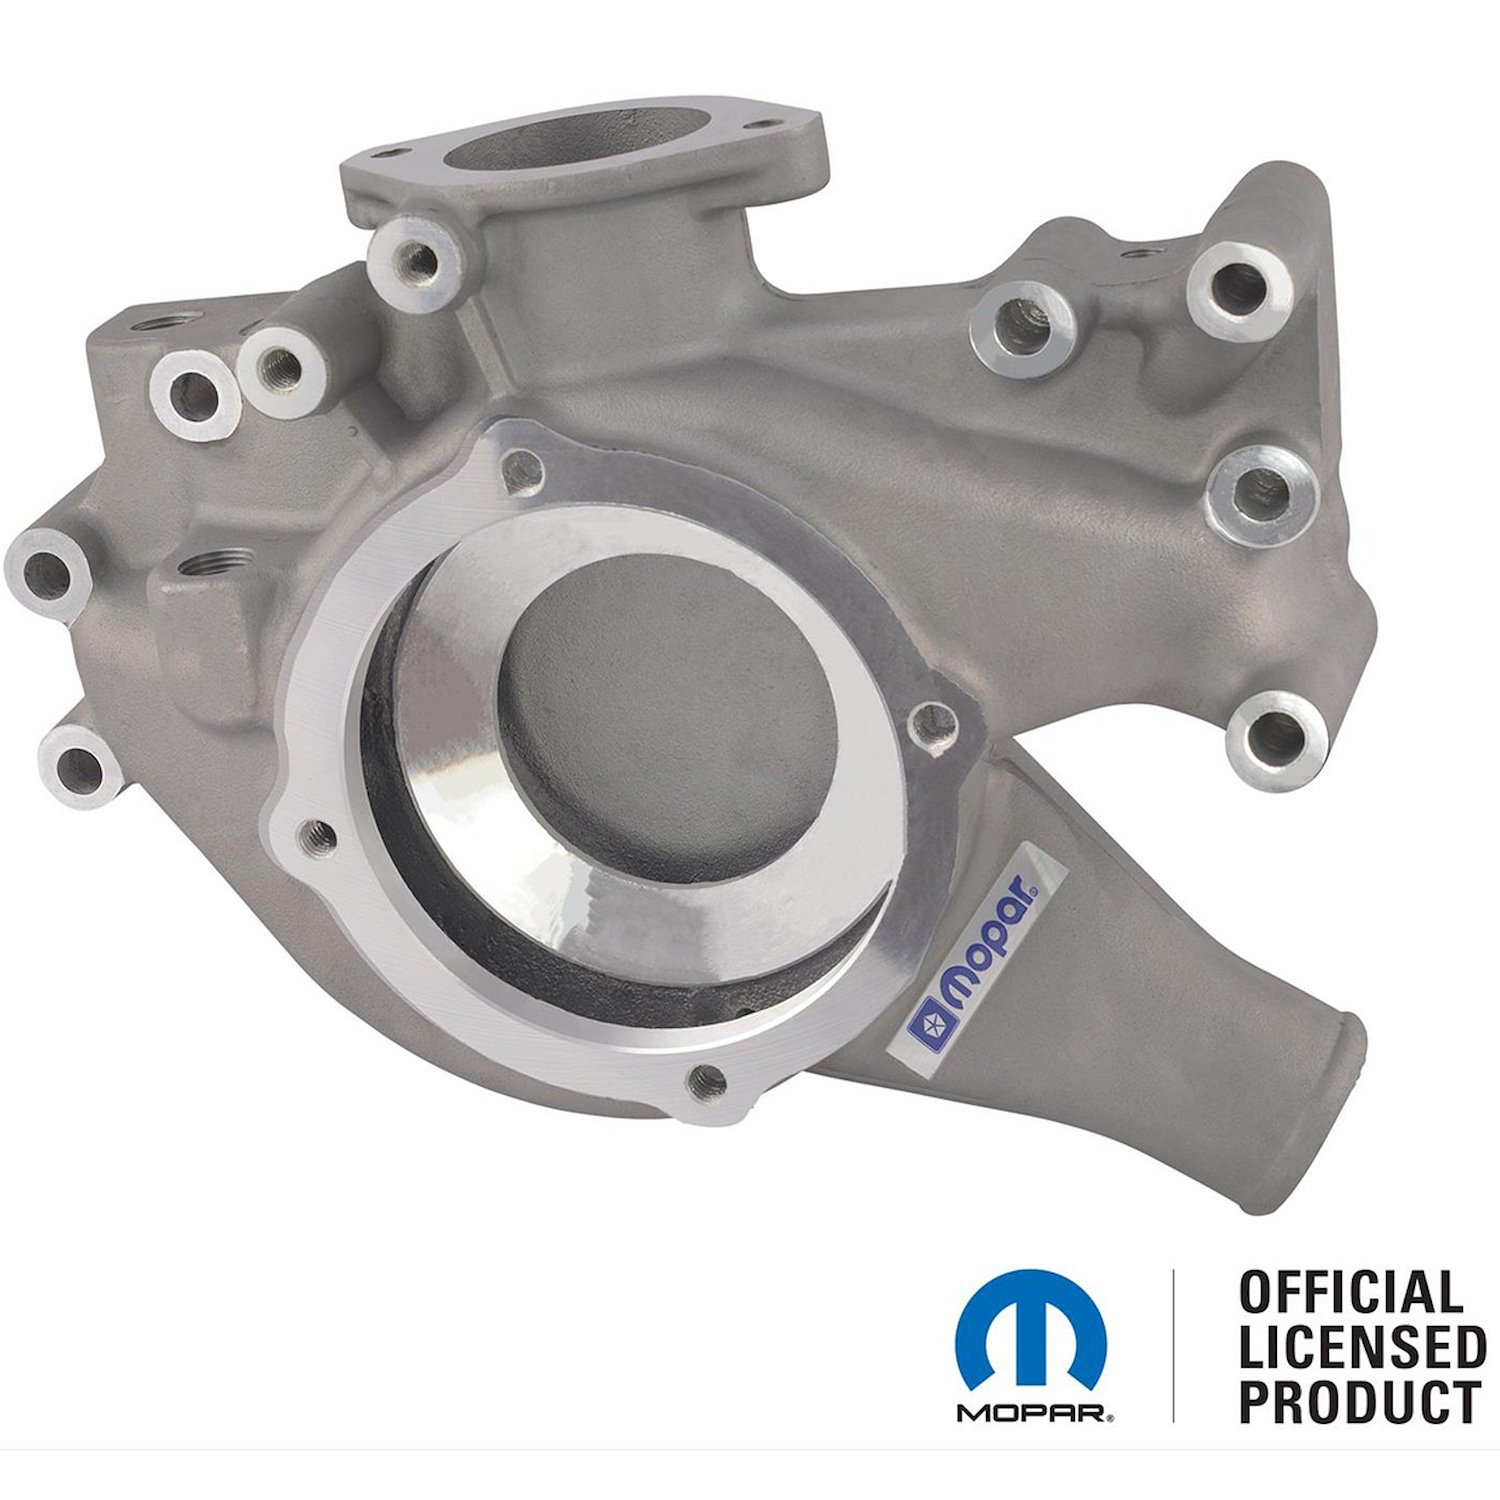 Officially Licensed Aluminum Water Pump Housing